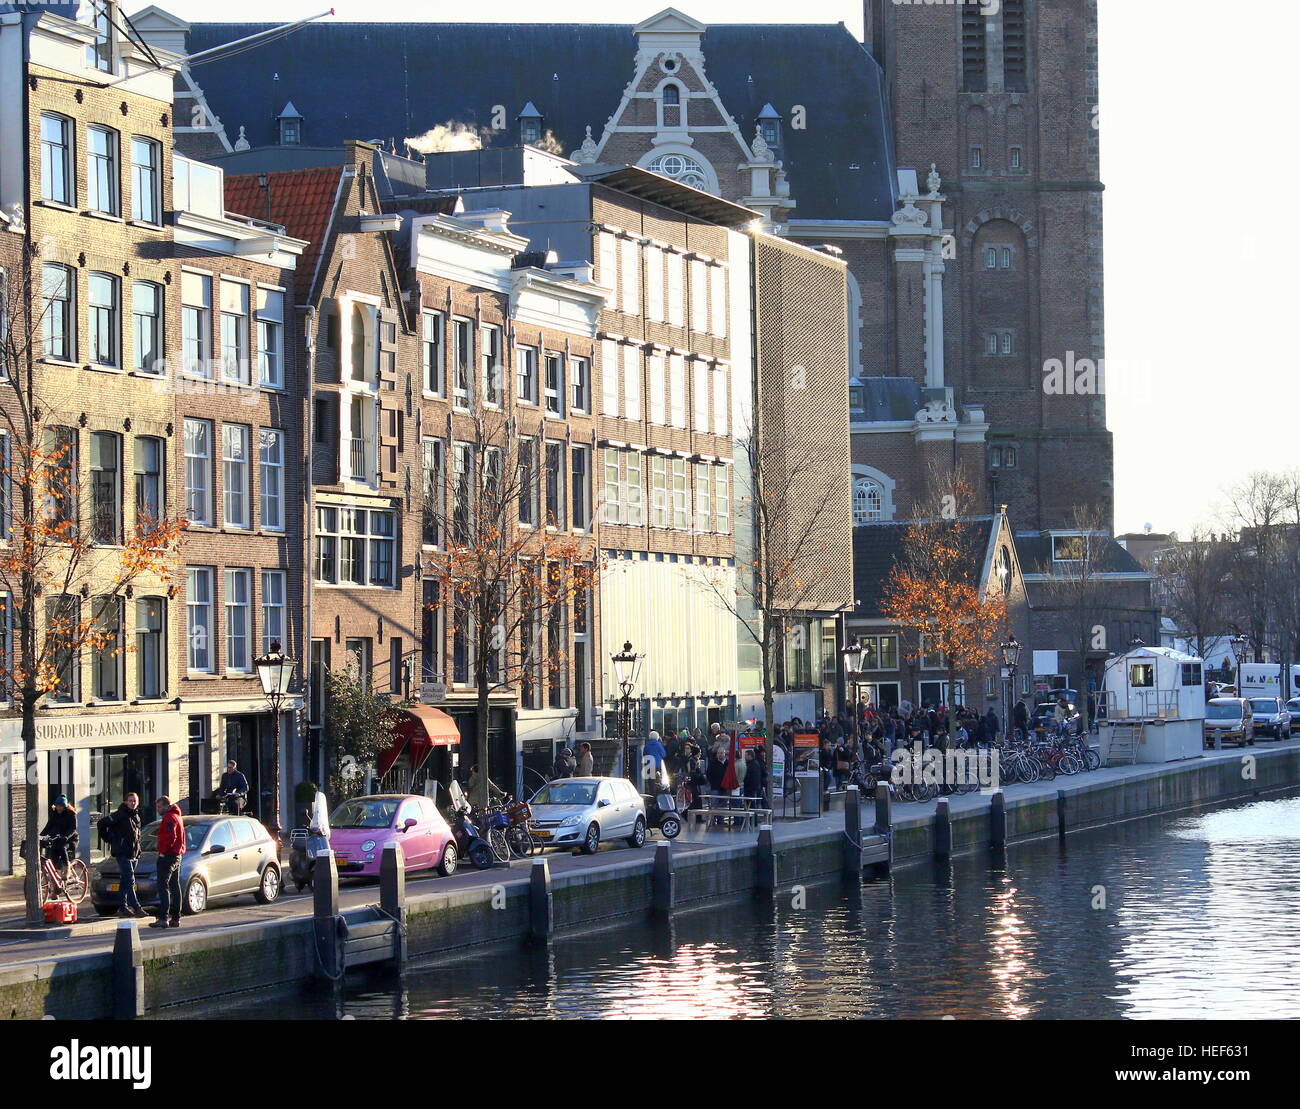 People standing in line at Anne Frank House Museum (Achterhuis / Secret Annex) at Prinsengracht canal, Amsterdam, winter 2016/17 Stock Photo